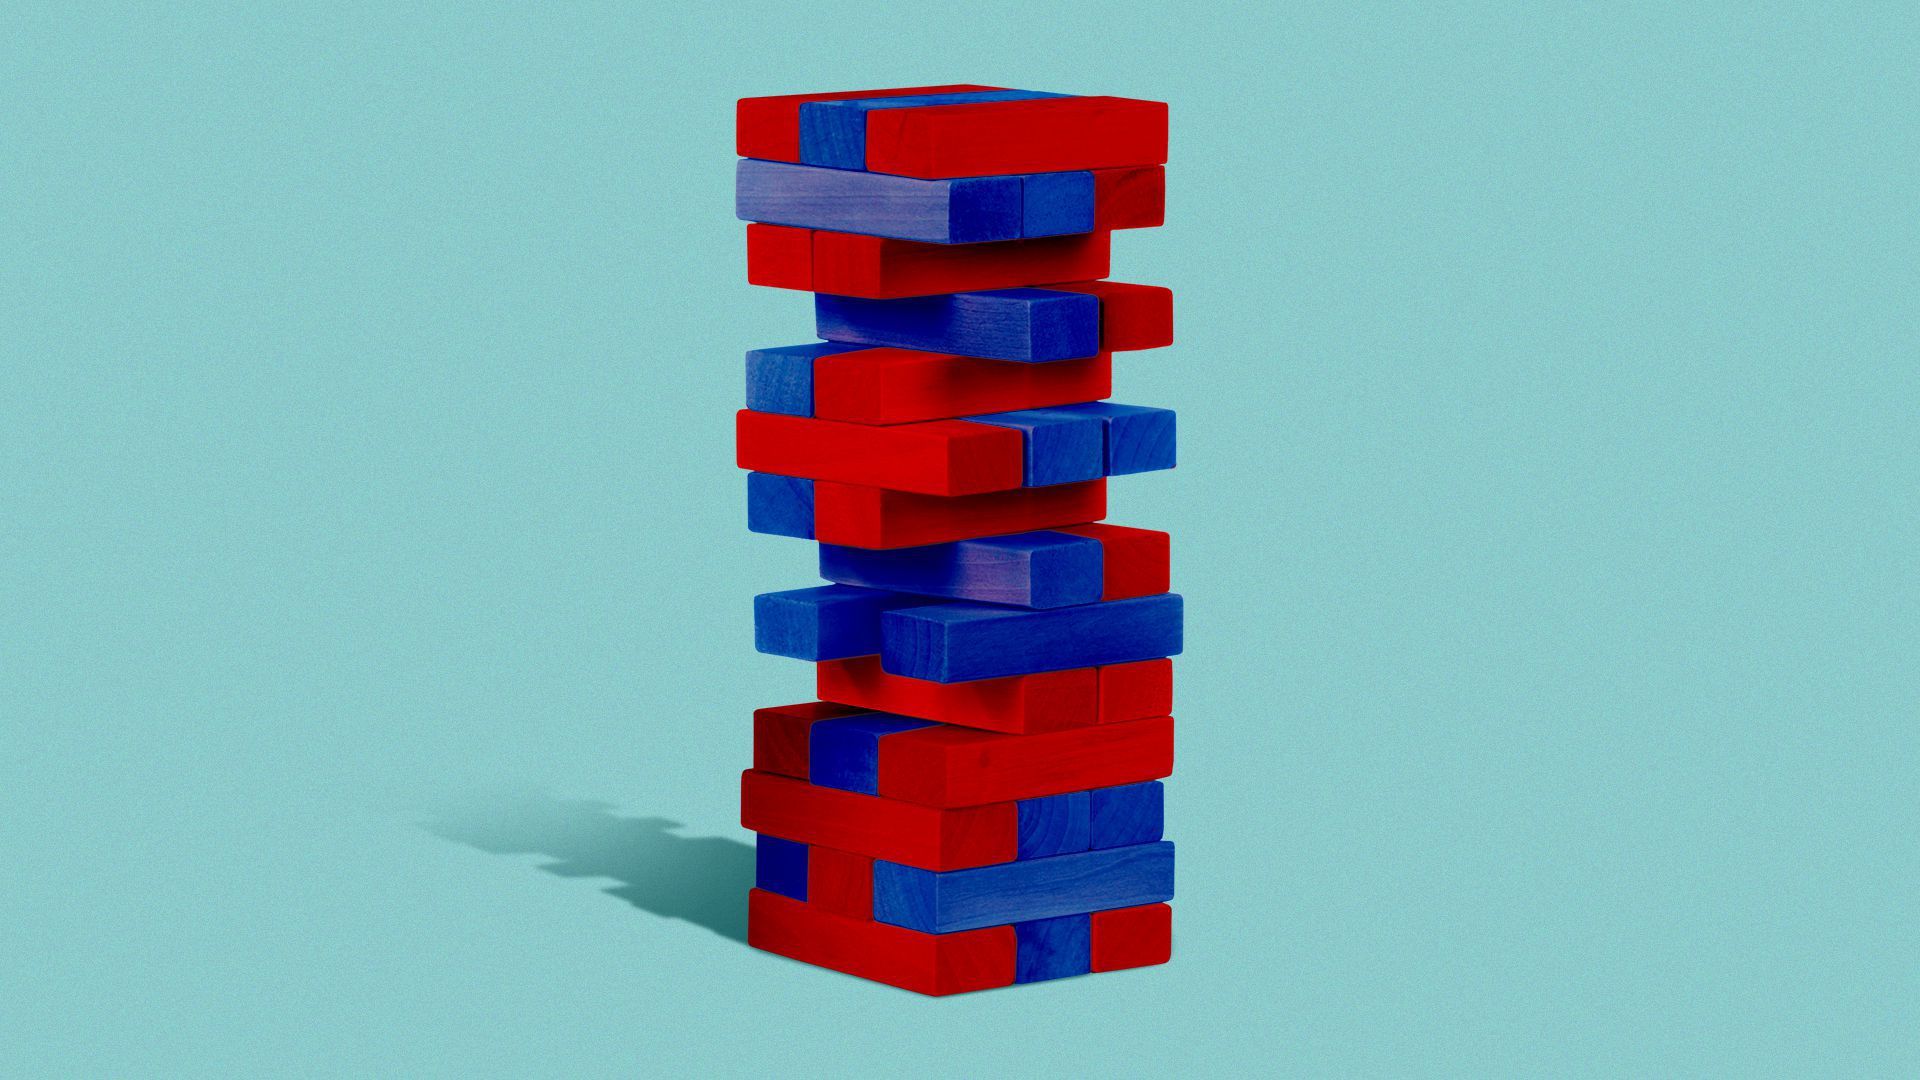 An illustration shows a red-and-blue Jenga game.